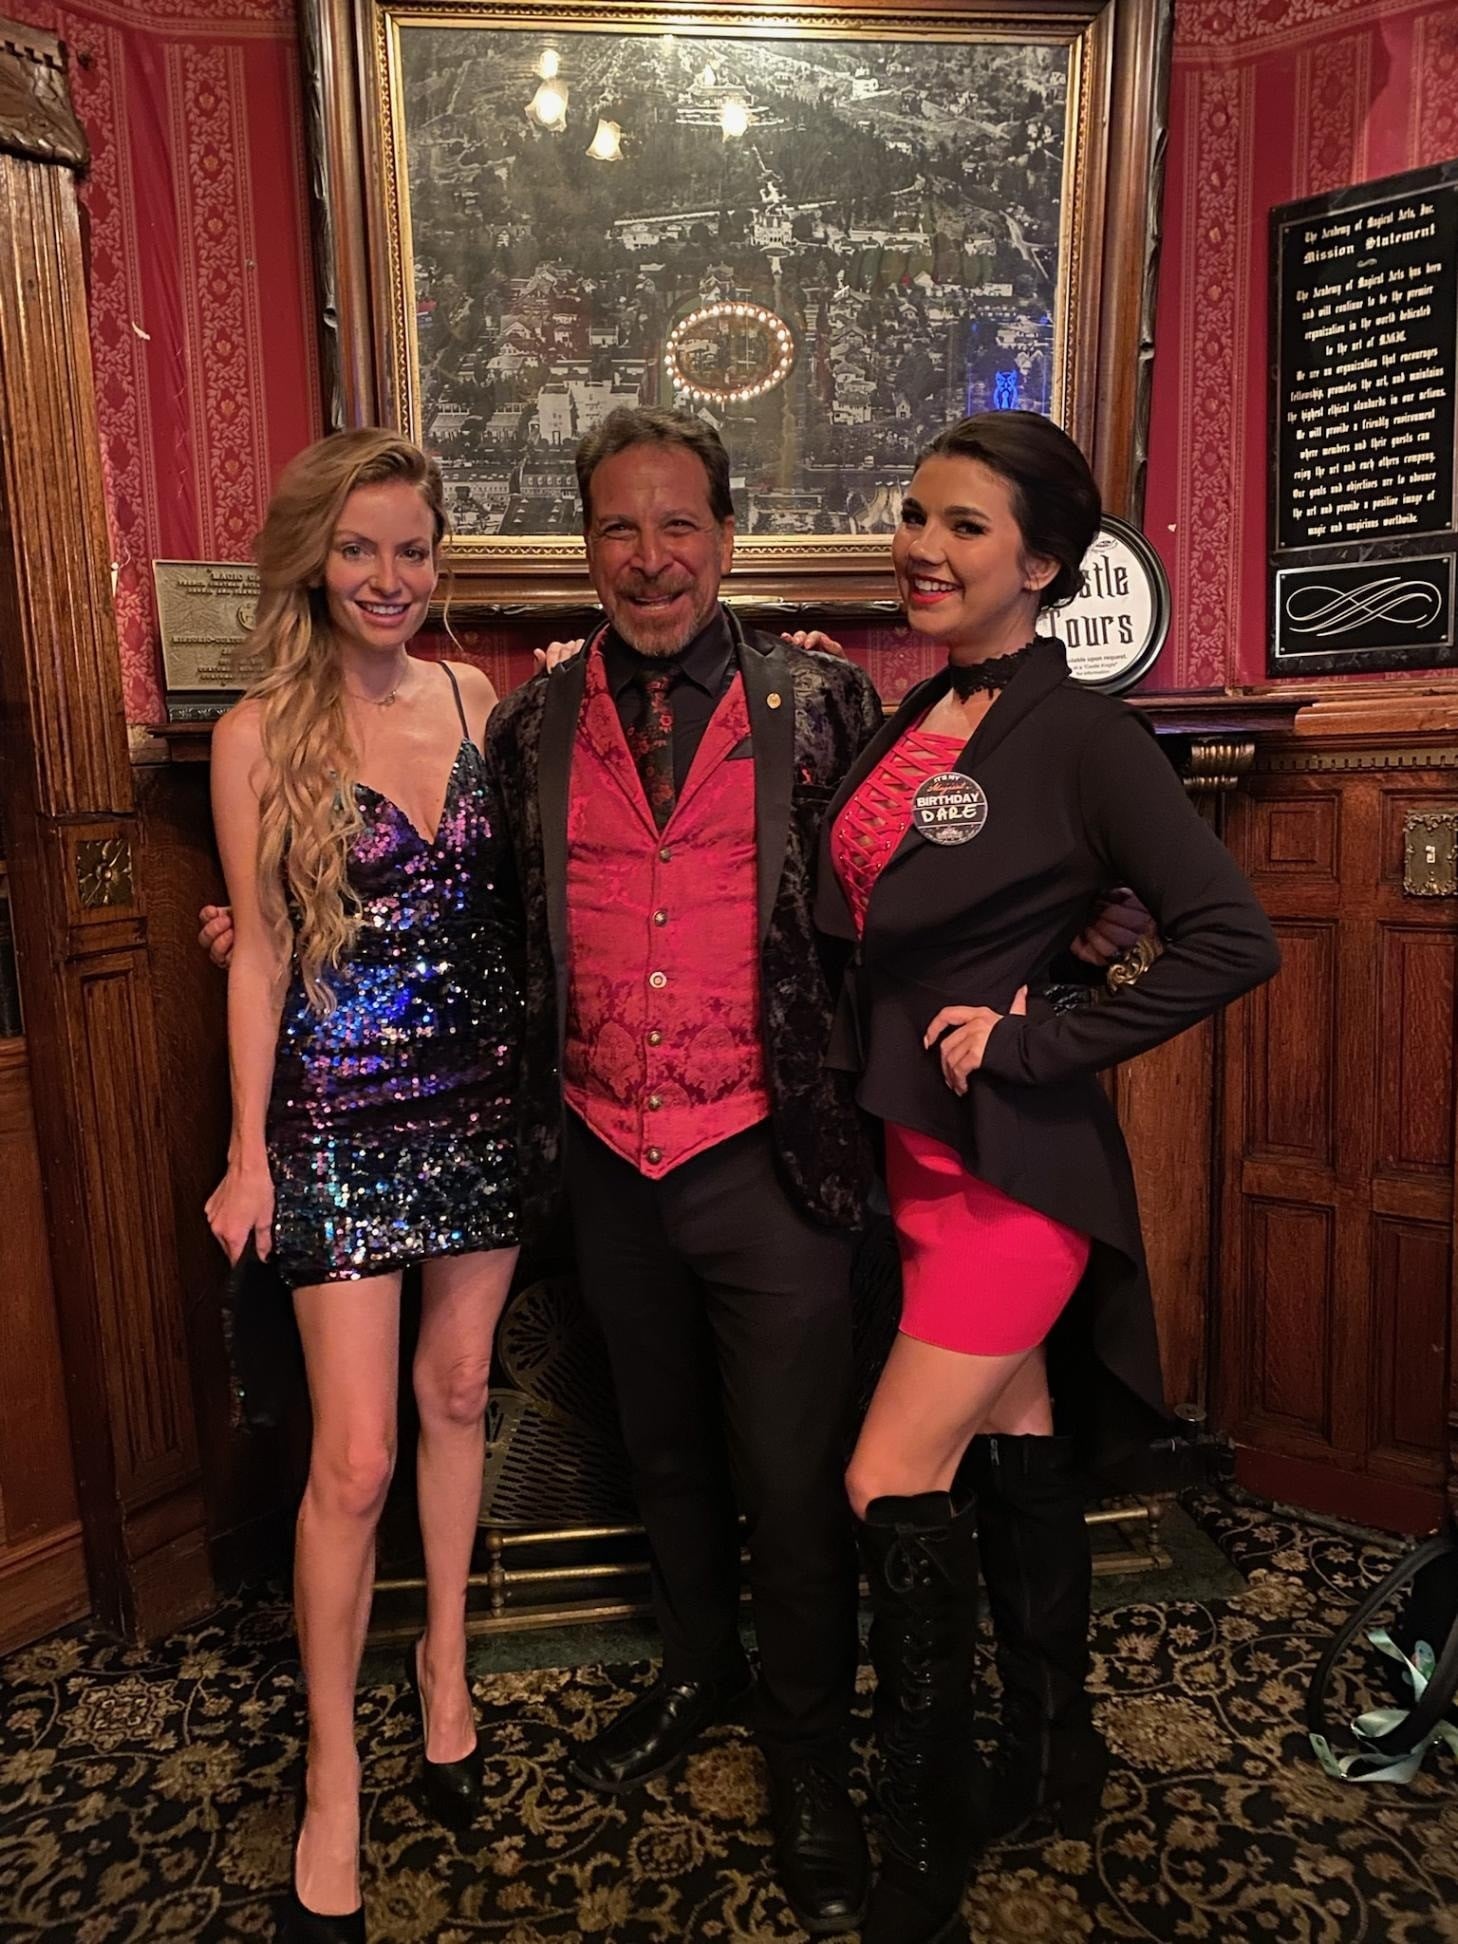 Sharpo the Master Magician posing at the Magic Castle with Actress Cody Renee Cameron